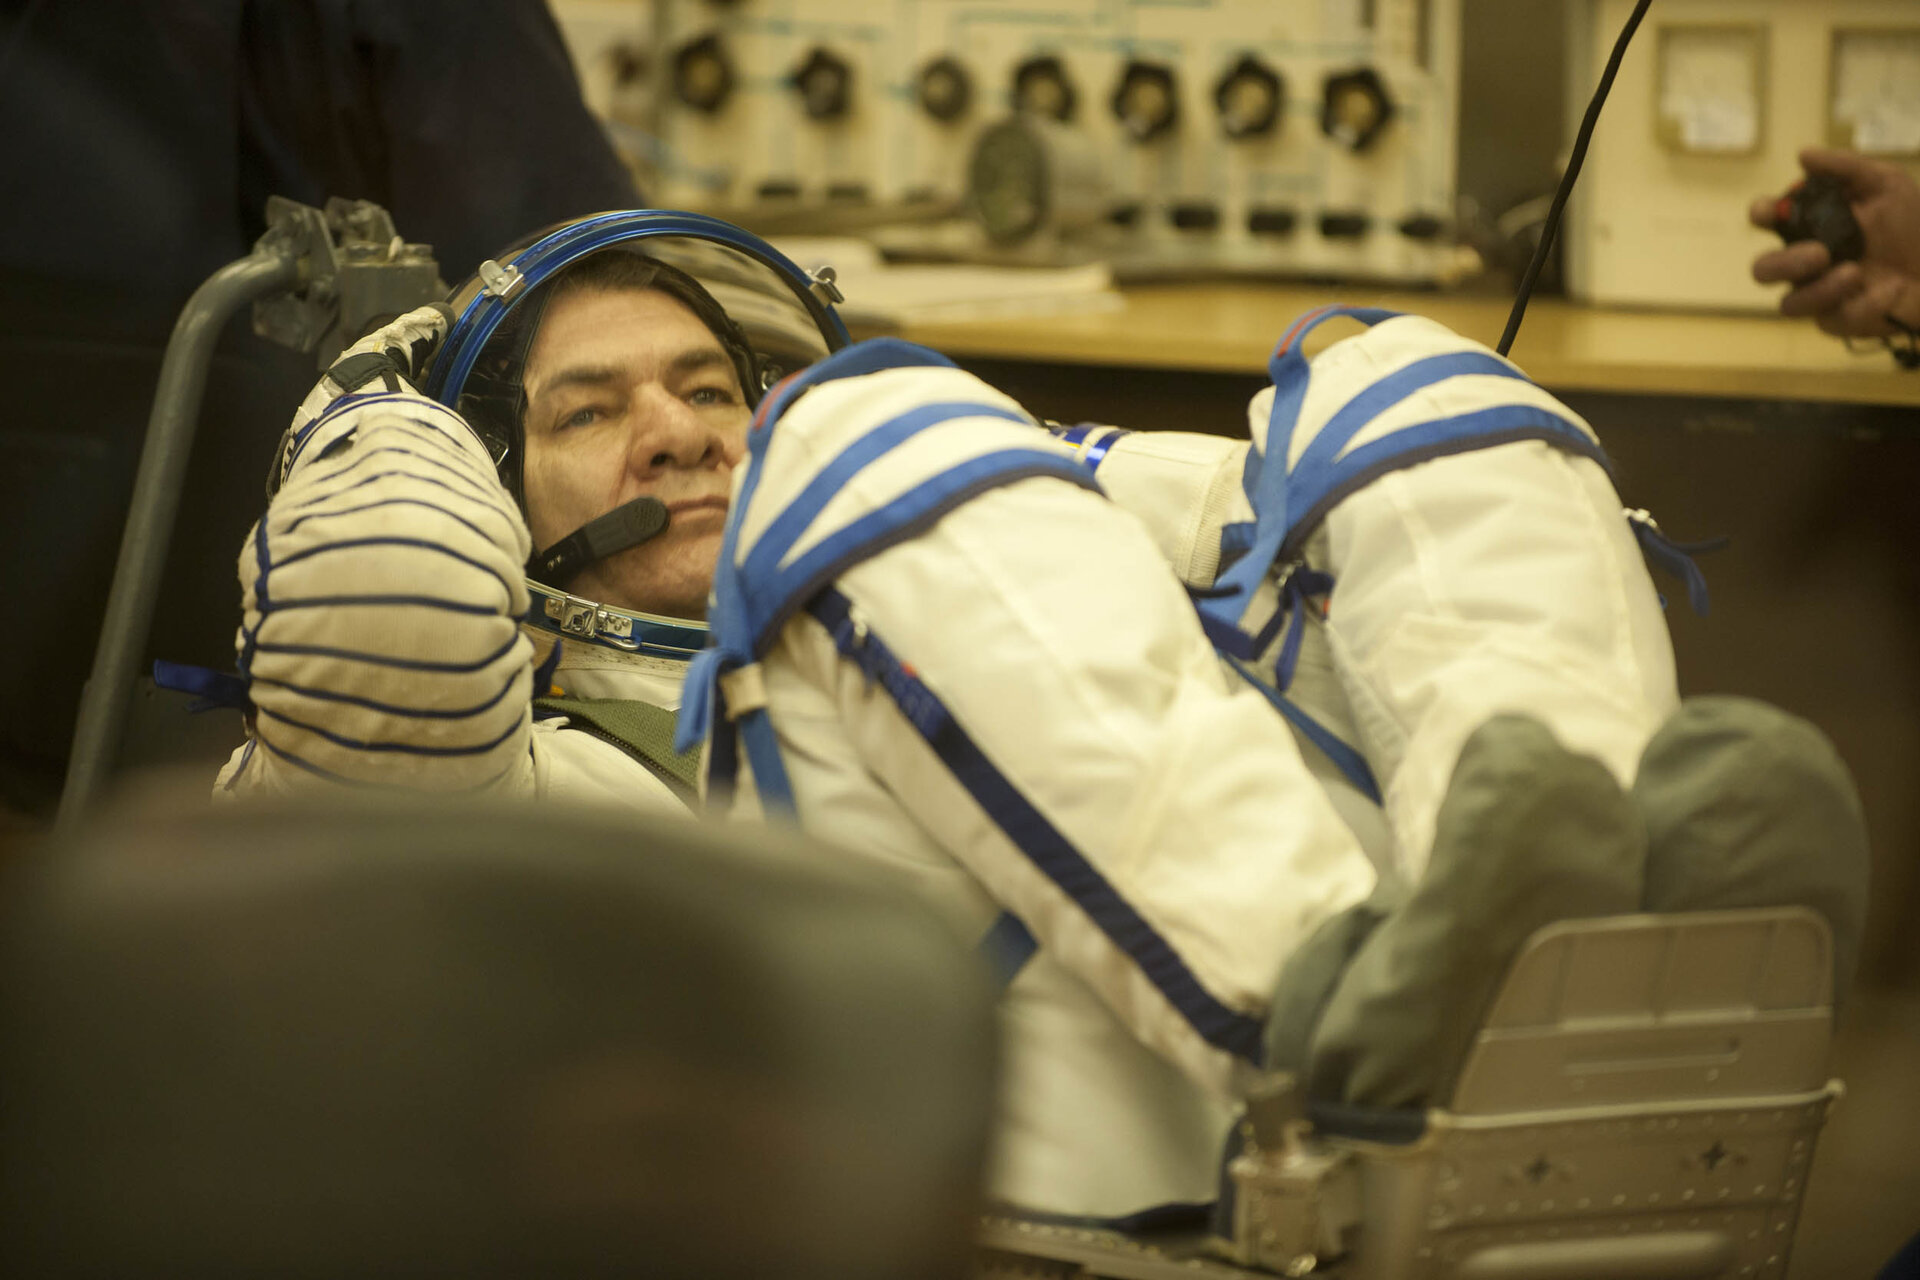 Paolo Nespoli dons his Sokol pressure suit in the MIK preparation building